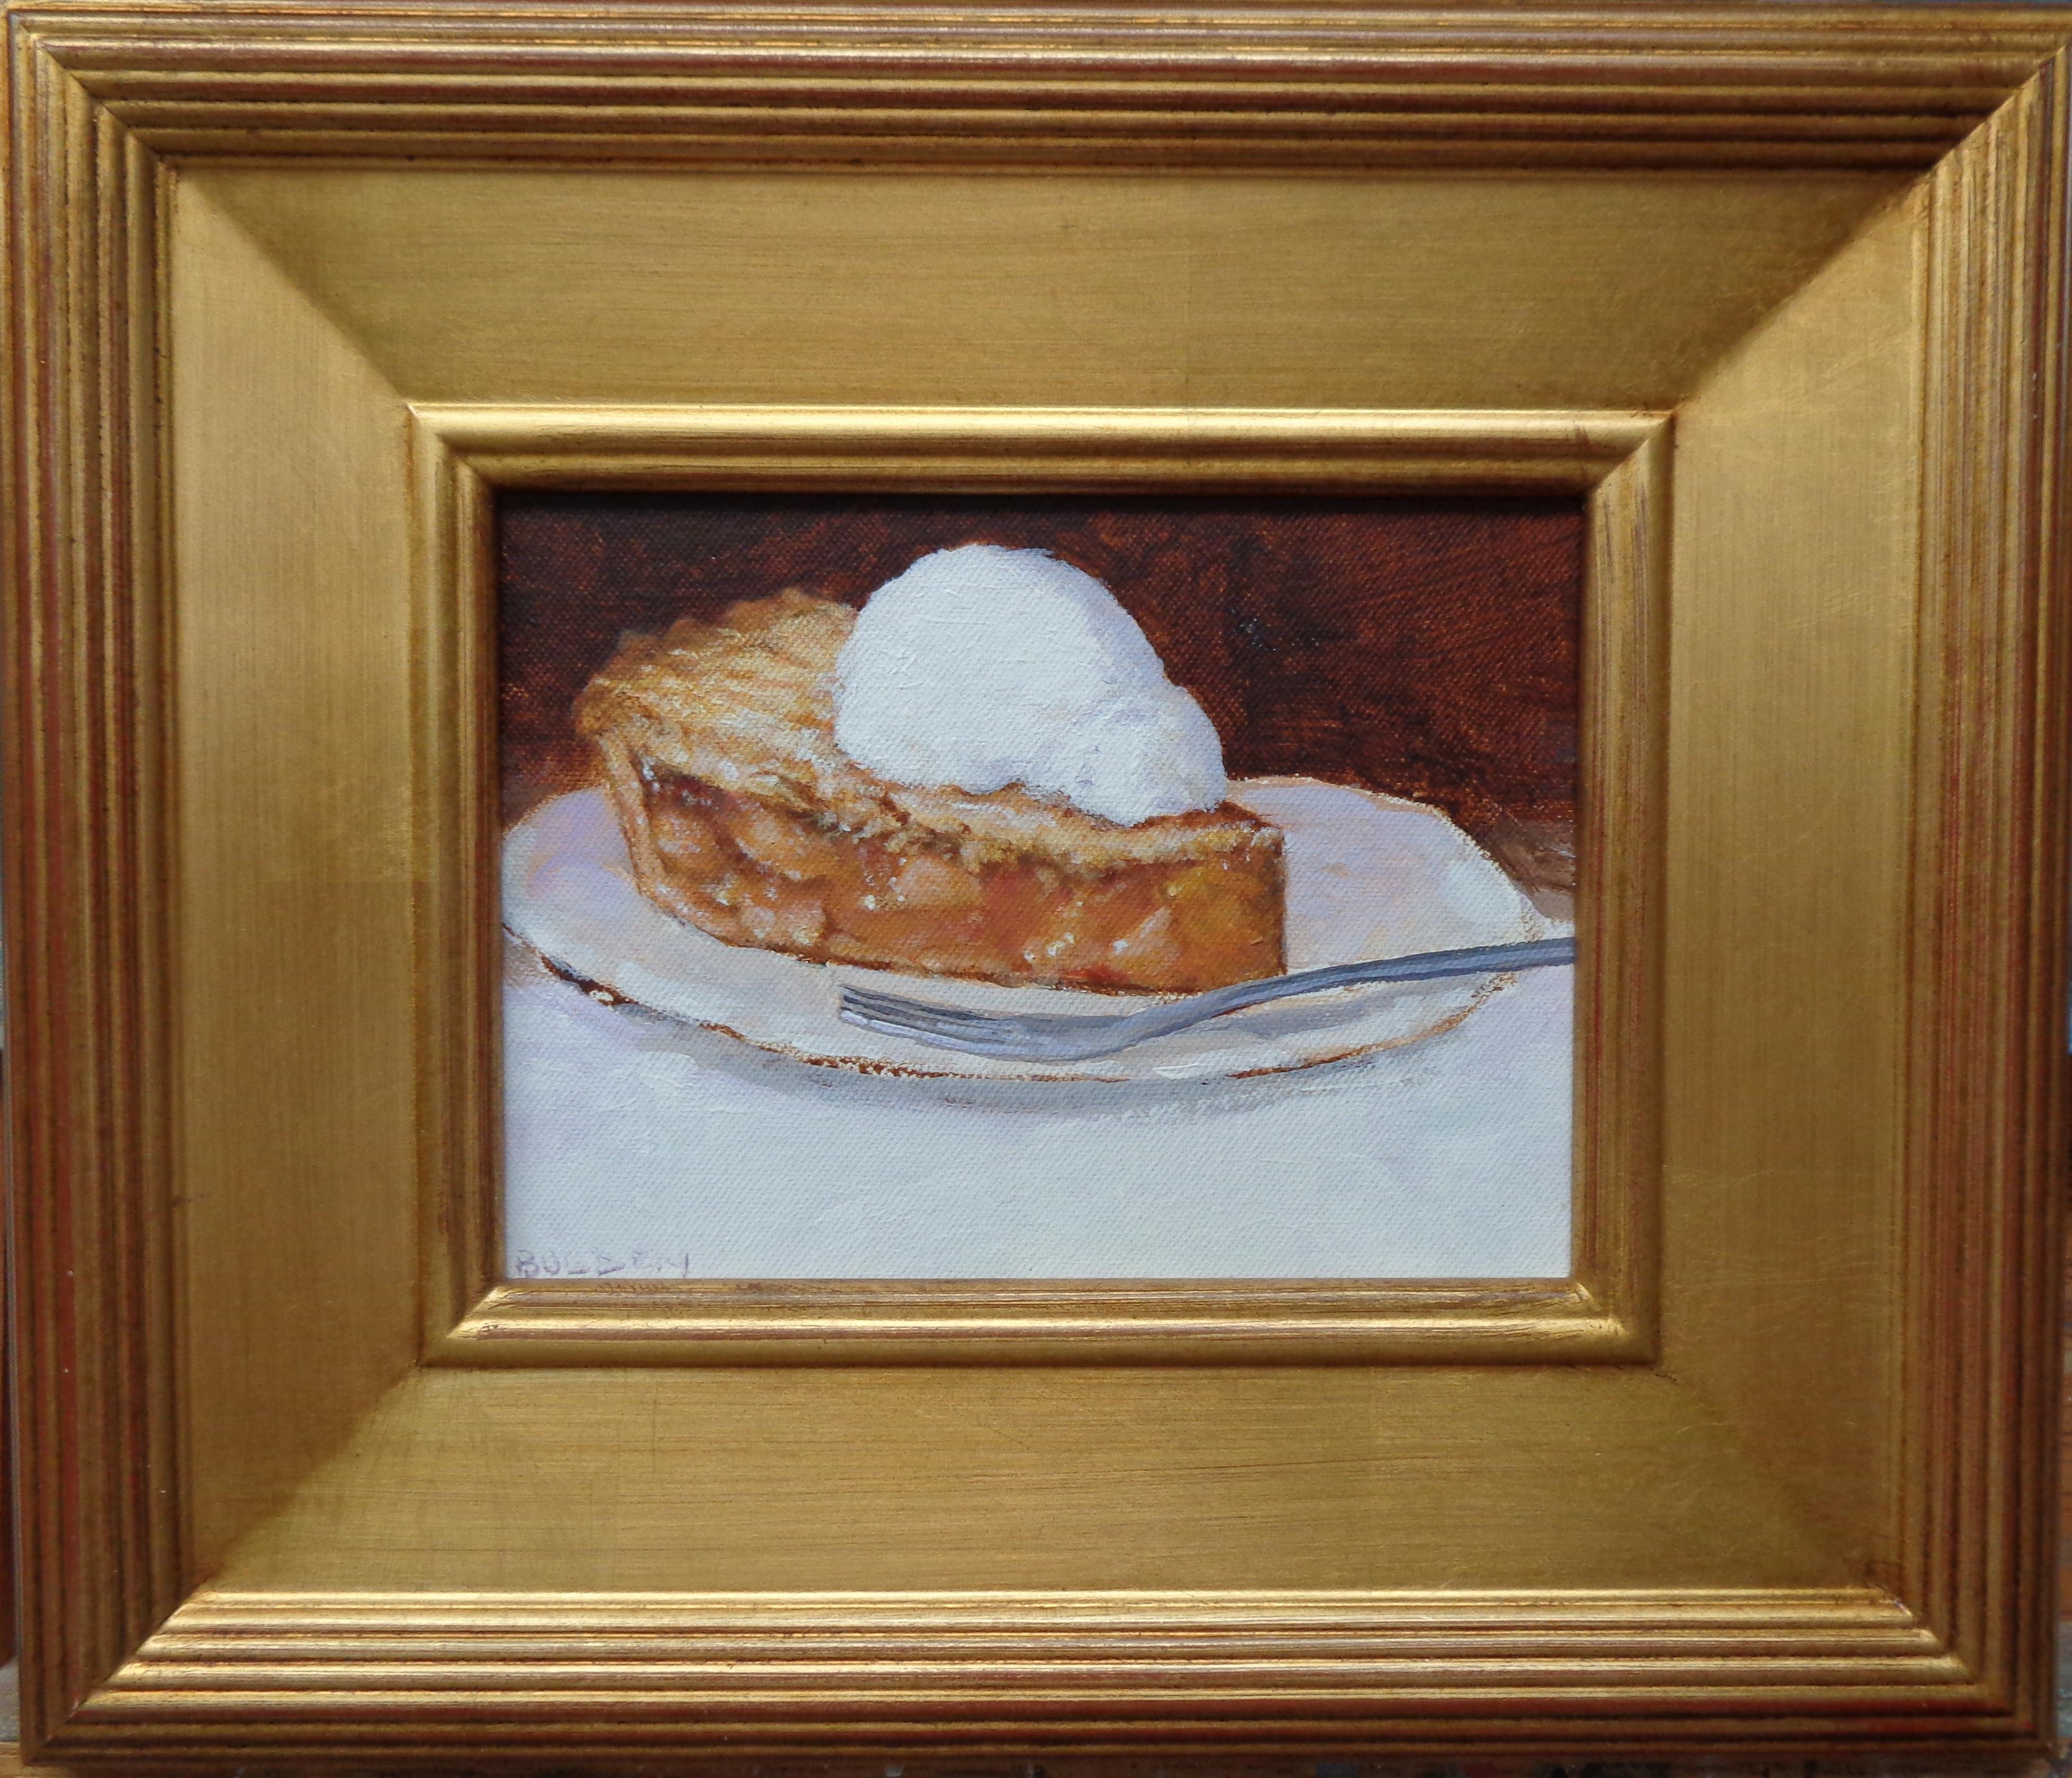 Apple Pie
6x8 unframed, 11.5 x 13.5 framed
An acrylic painting on canvas by award winning contemporary artist Michael Budden that showcases a piece of apple pie. Painting is new frame shows age.
ARTIST'S STATEMENT
I have been in the art business as